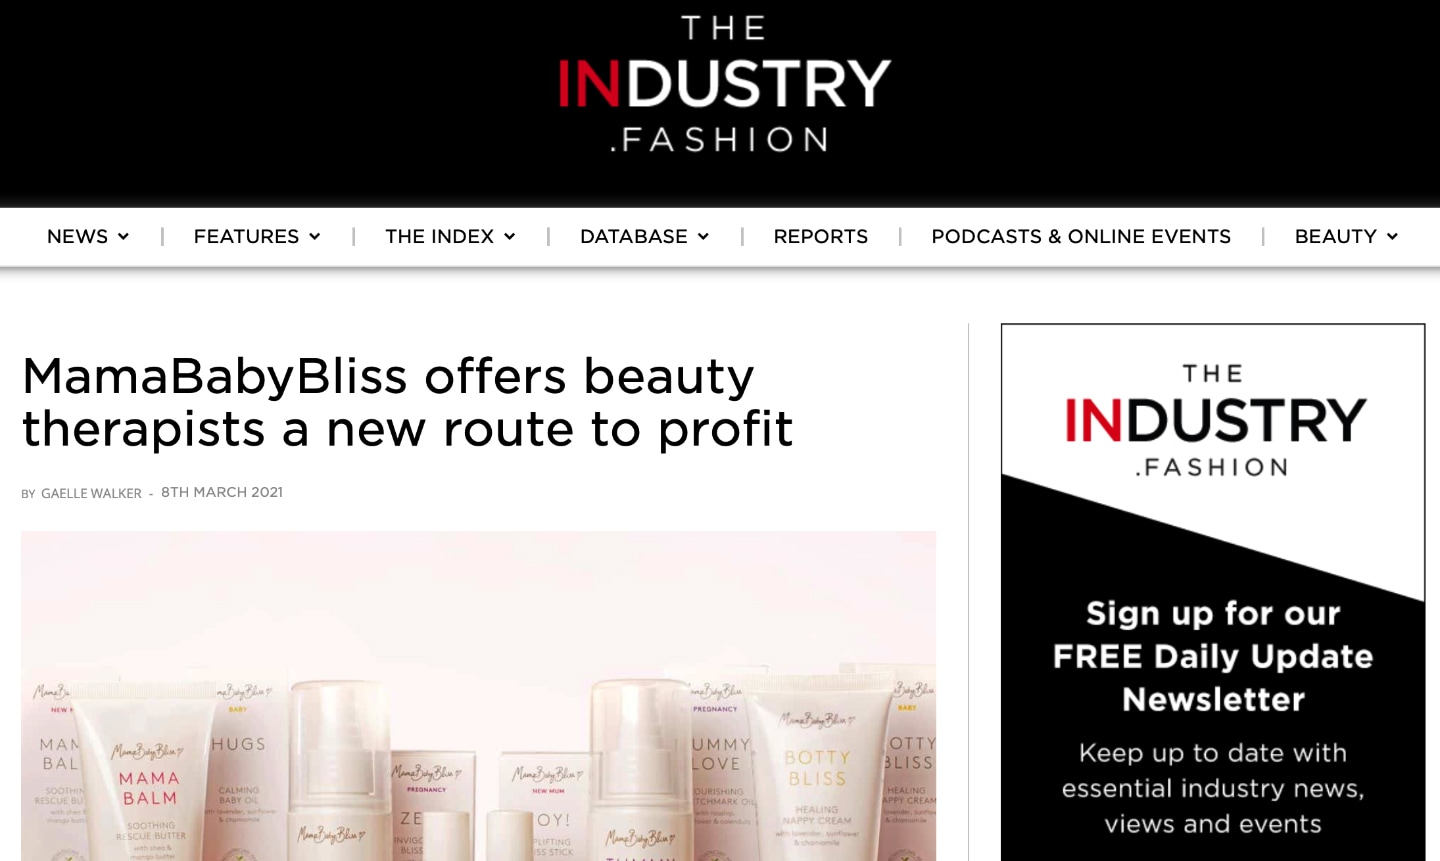 MamaBabyBliss offers beauty therapists a new route to profit